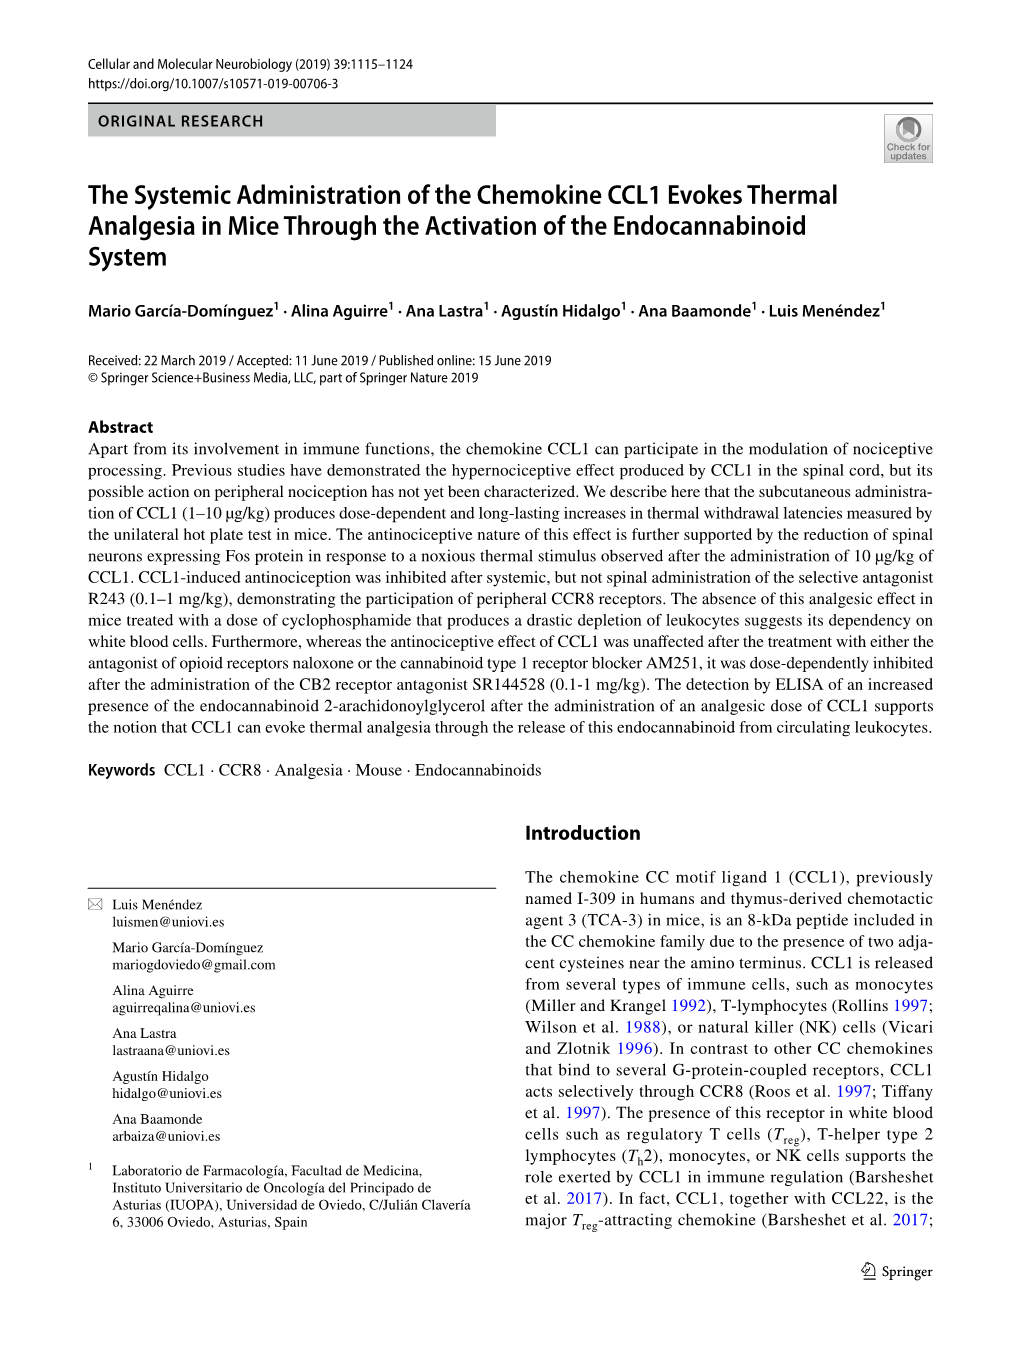 The Systemic Administration of the Chemokine CCL1 Evokes Thermal Analgesia in Mice Through the Activation of the Endocannabinoid System